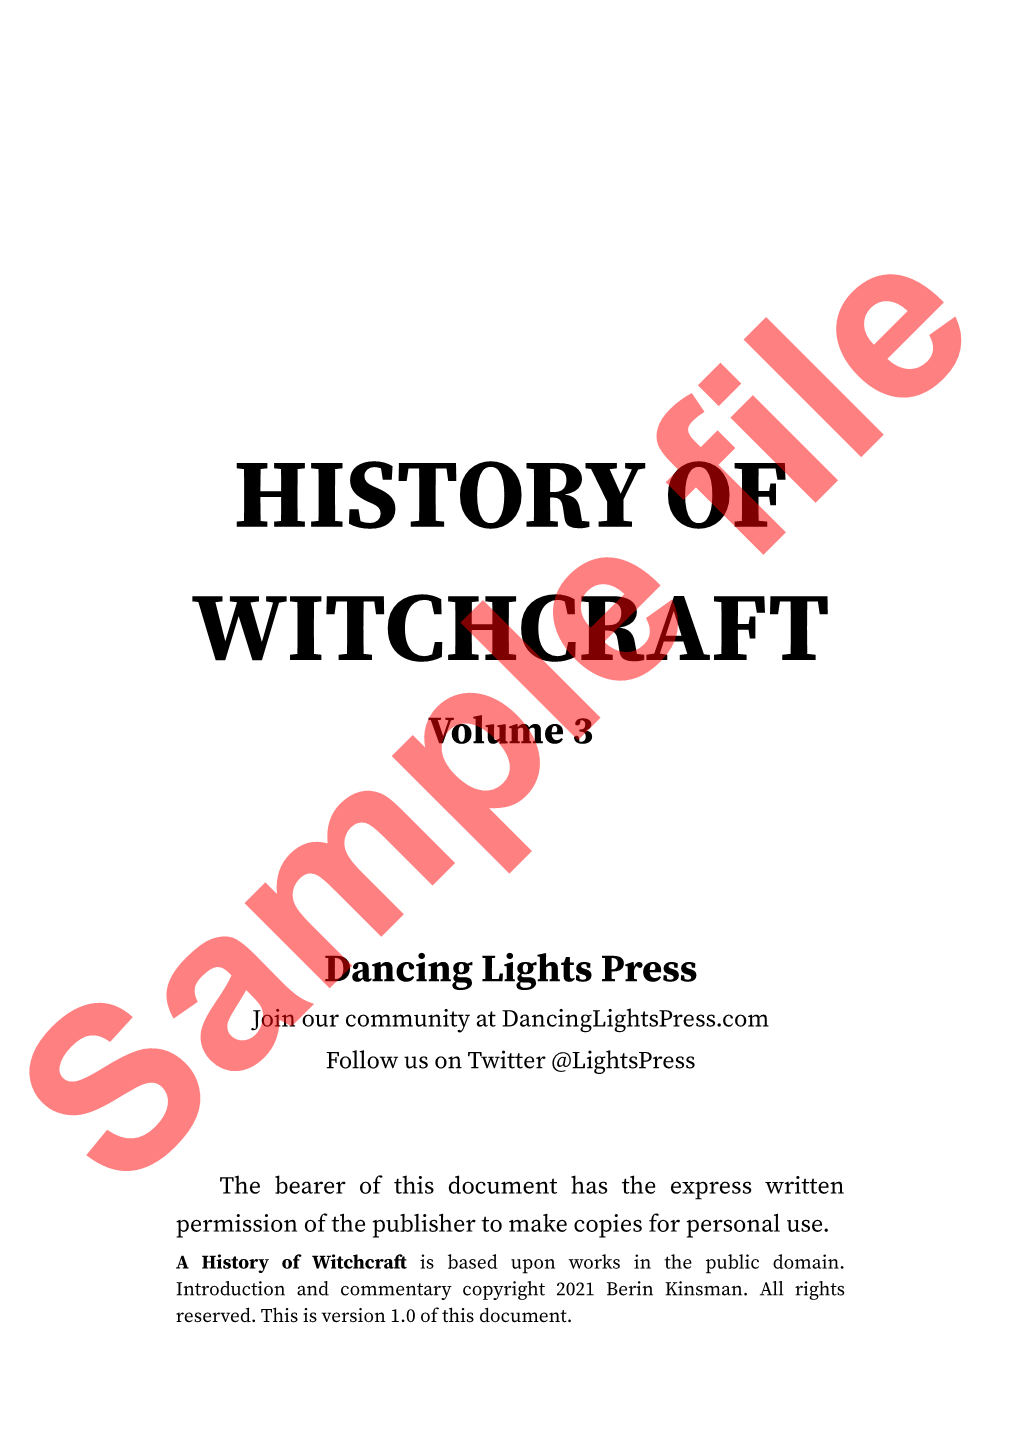 HISTORY of WITCHCRAFT Volume 3